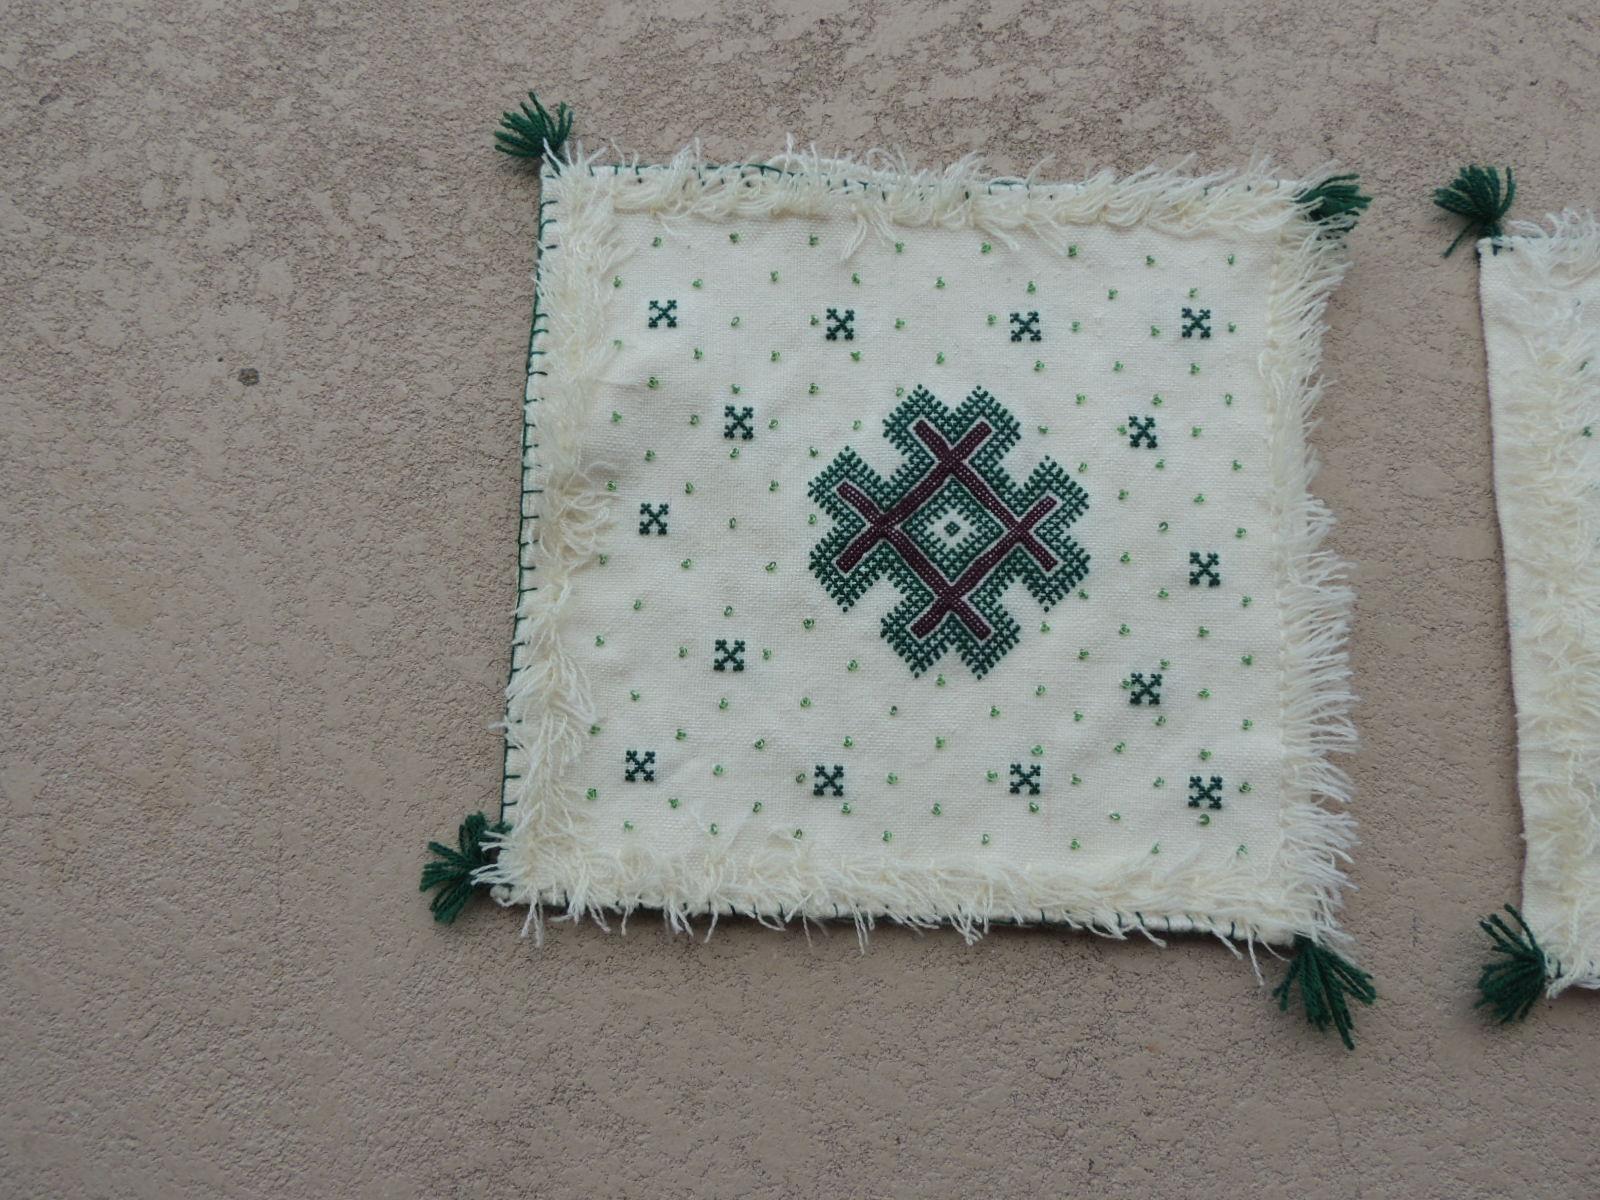 Pair of Petite Moroccan beaded and embroidered pillow covers with tassels.
Small glass beads all around the embroidery.
Hand stitched.
(NO INSERTS)
They are easily fill with poly-fill.
Size: 14